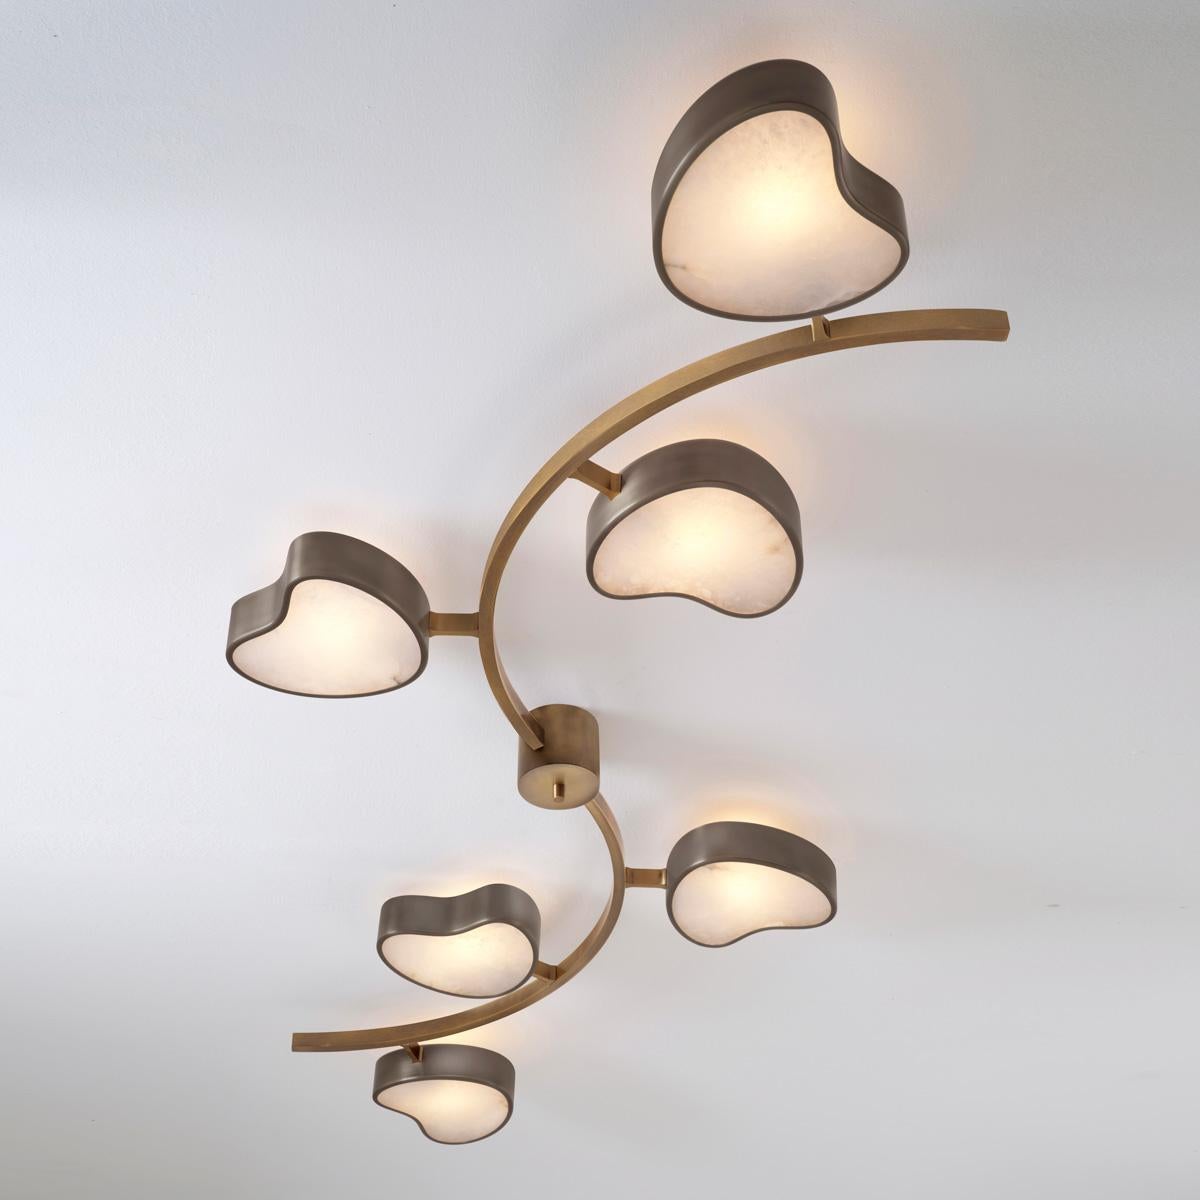 Modern Cuore N.6 Ceiling Light by Gaspare Asaro. Bronze and Satin Brass Finish For Sale